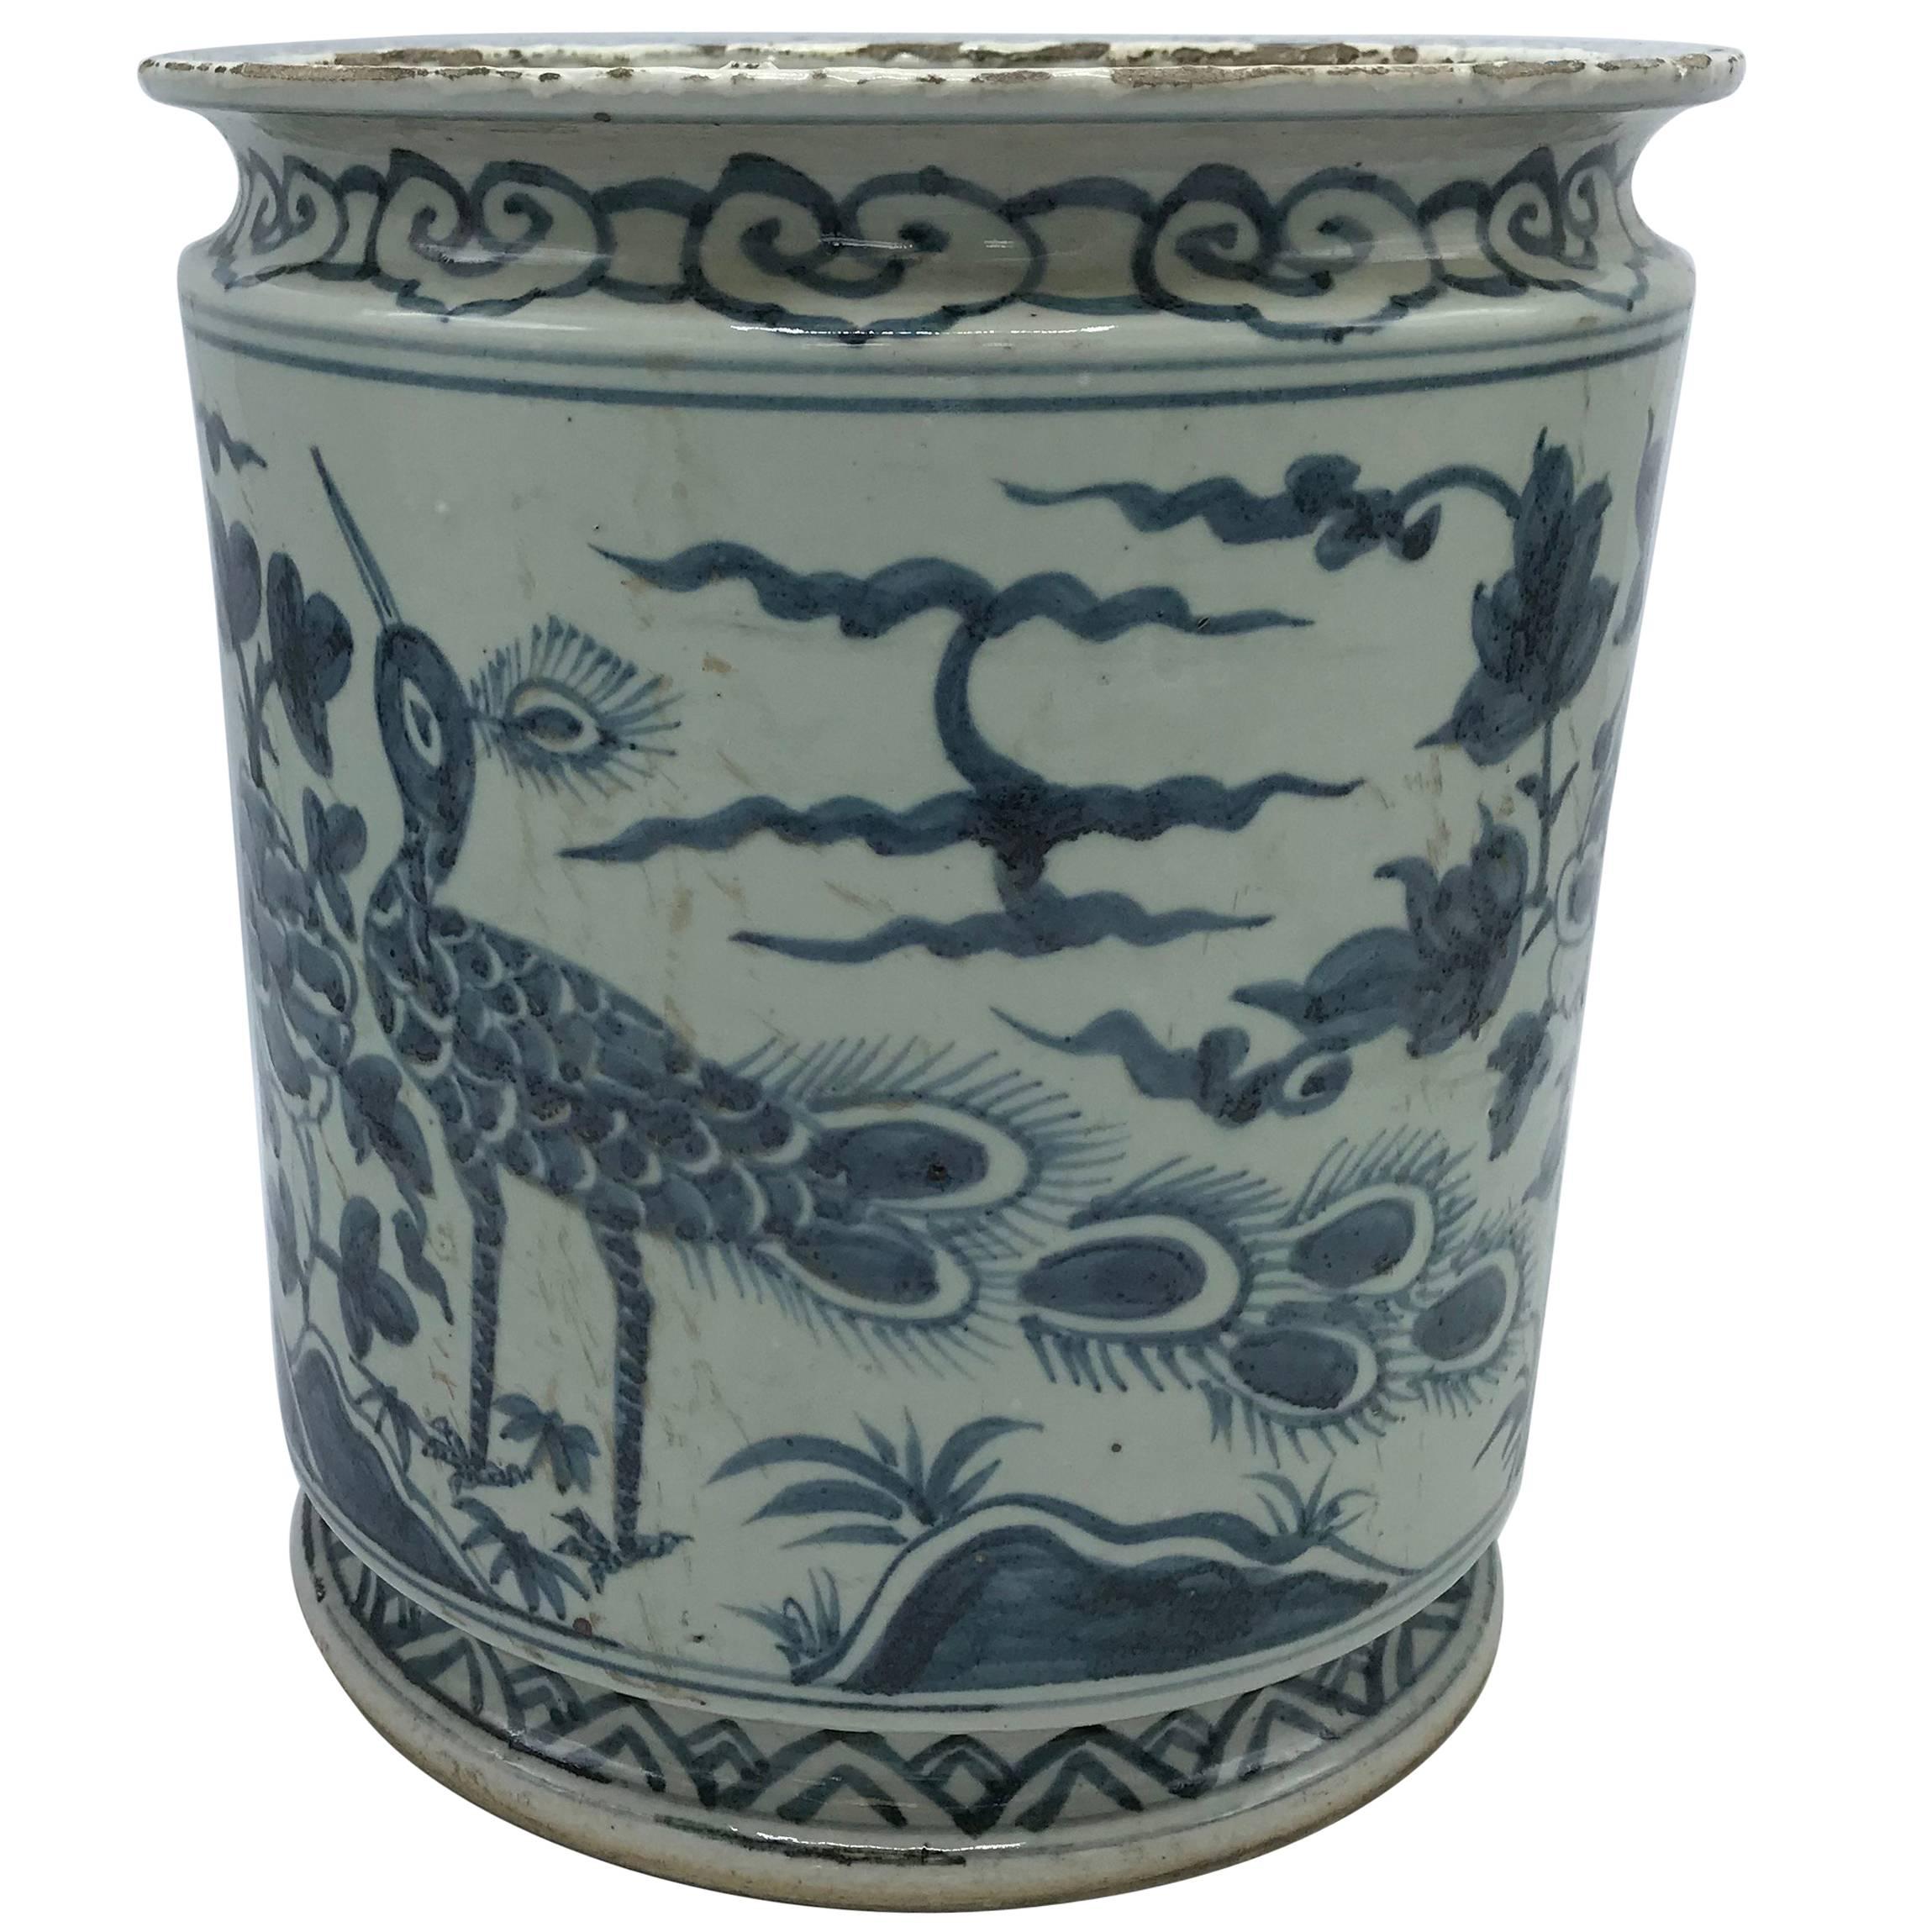 19th Century Blue and White Cachepot Planter with Peacock and Floral Motif